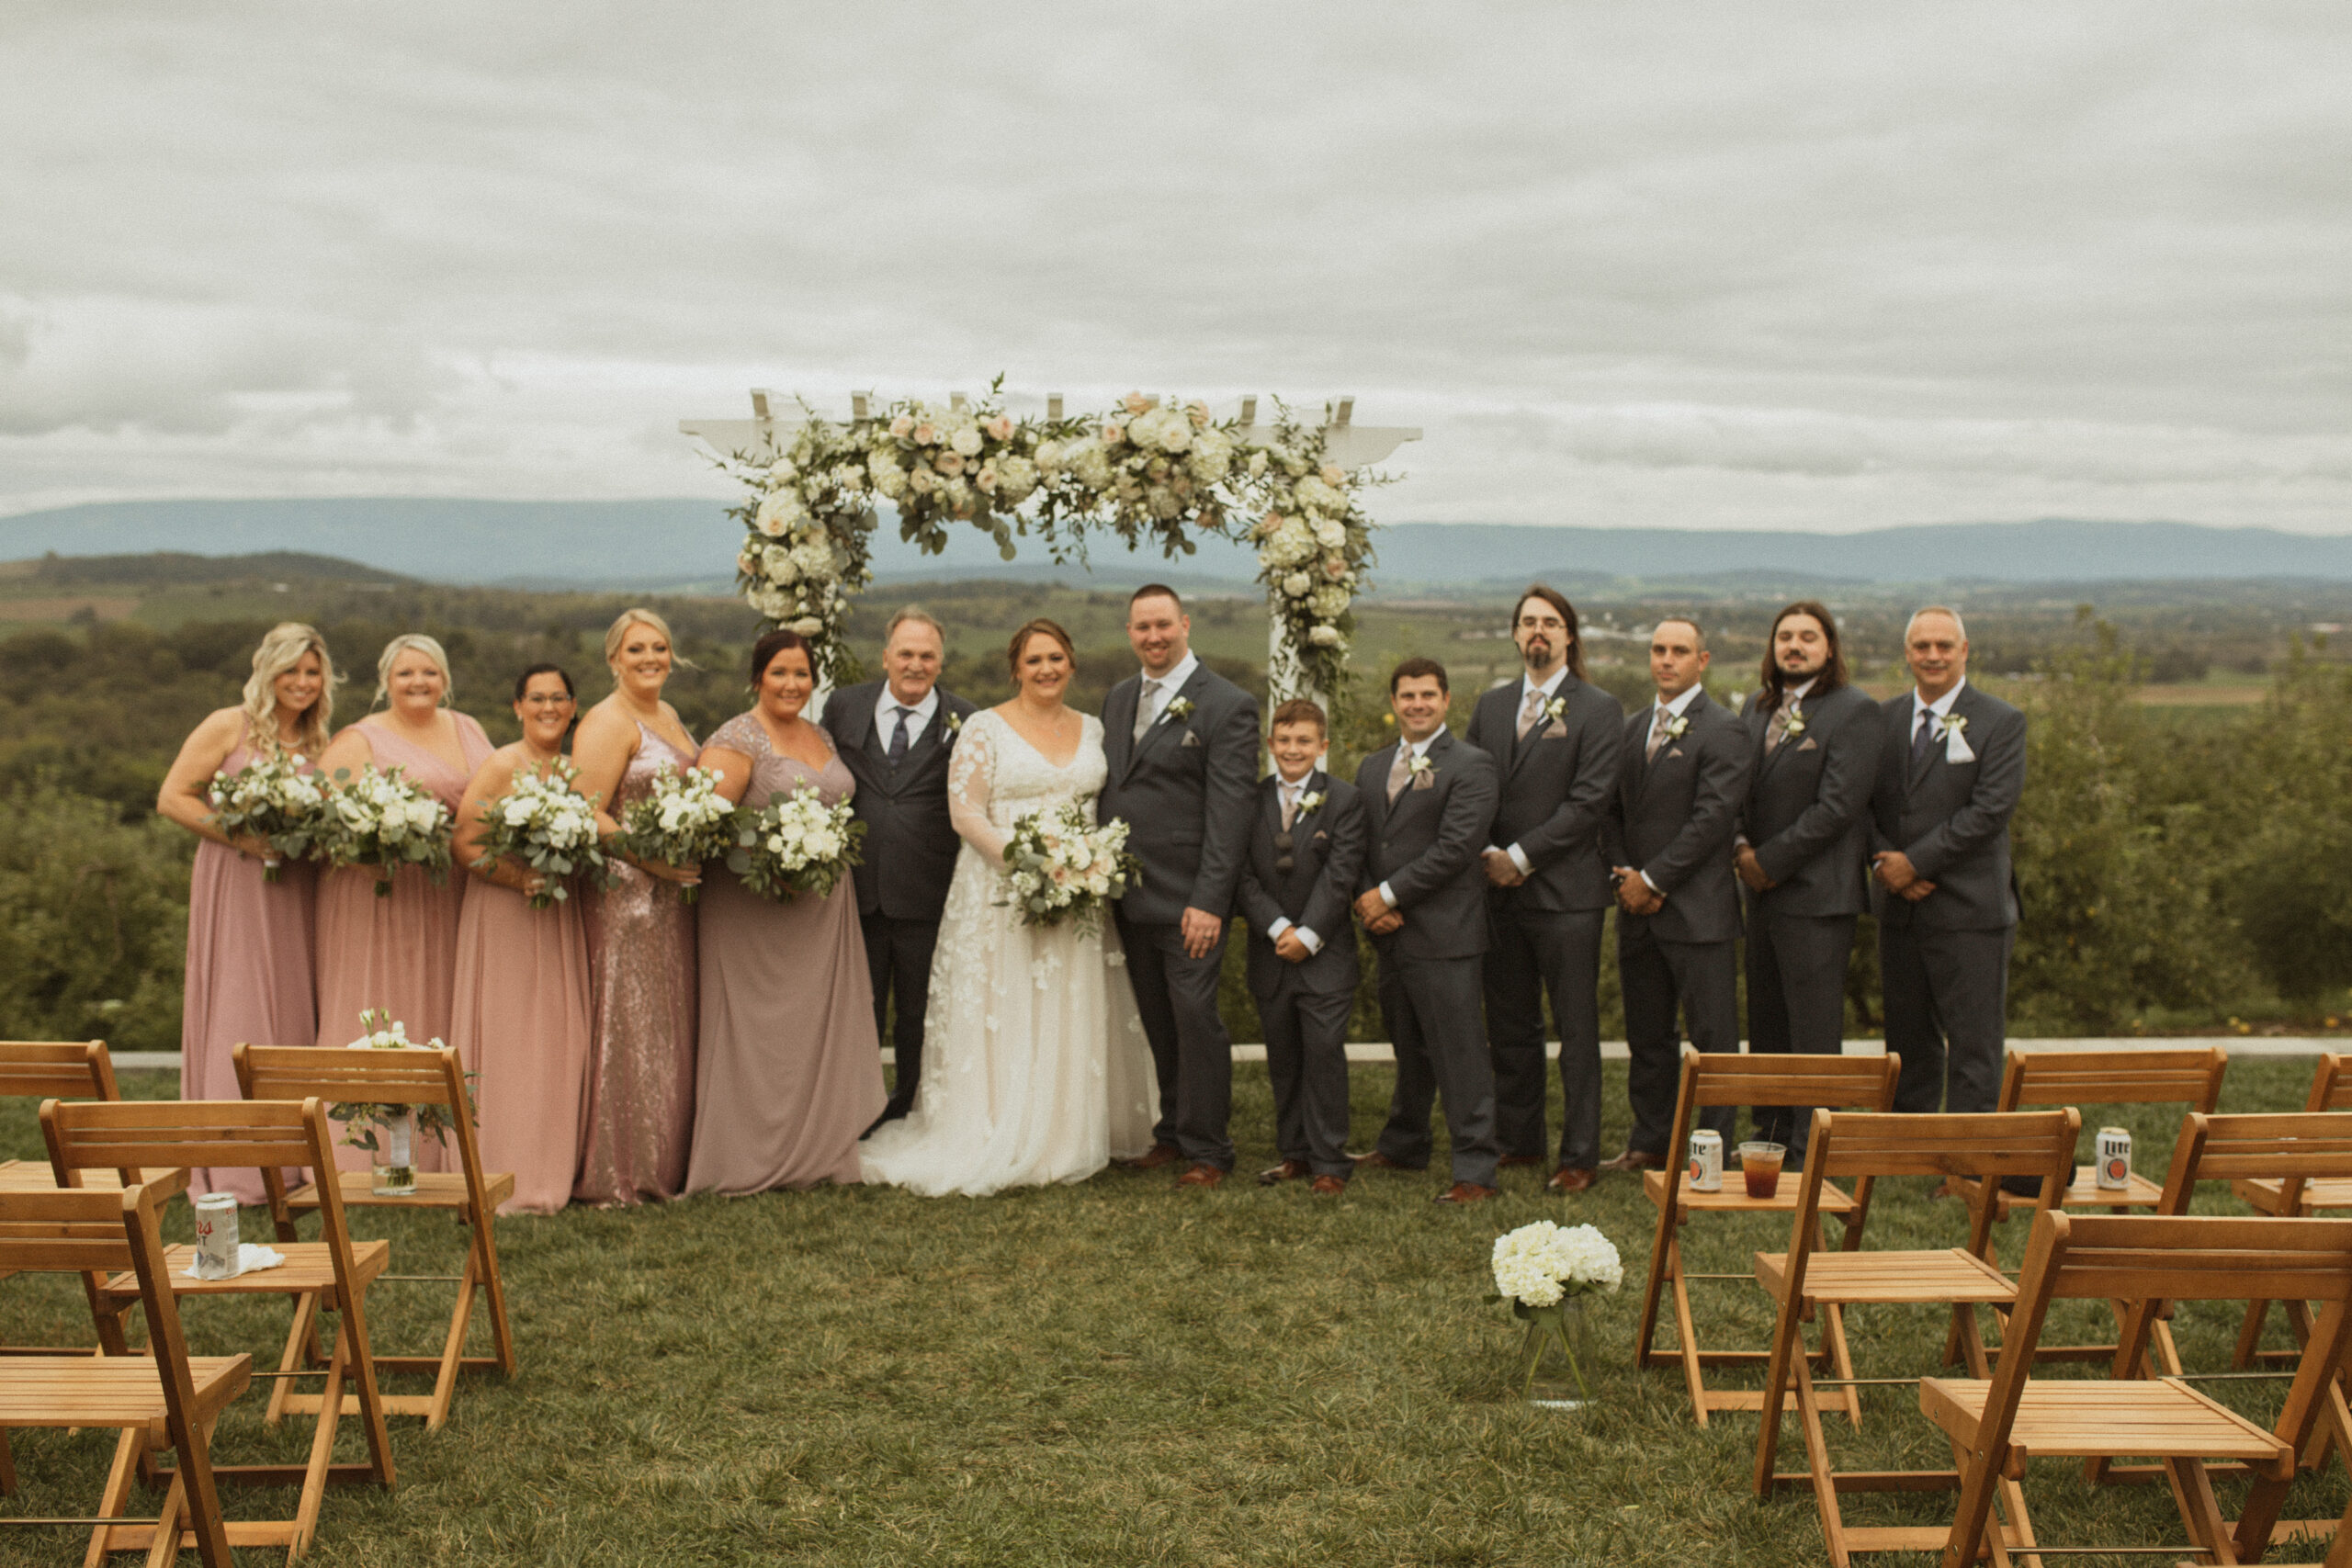 Entire wedding party of both sides standing in front of the flower arch for a group photo